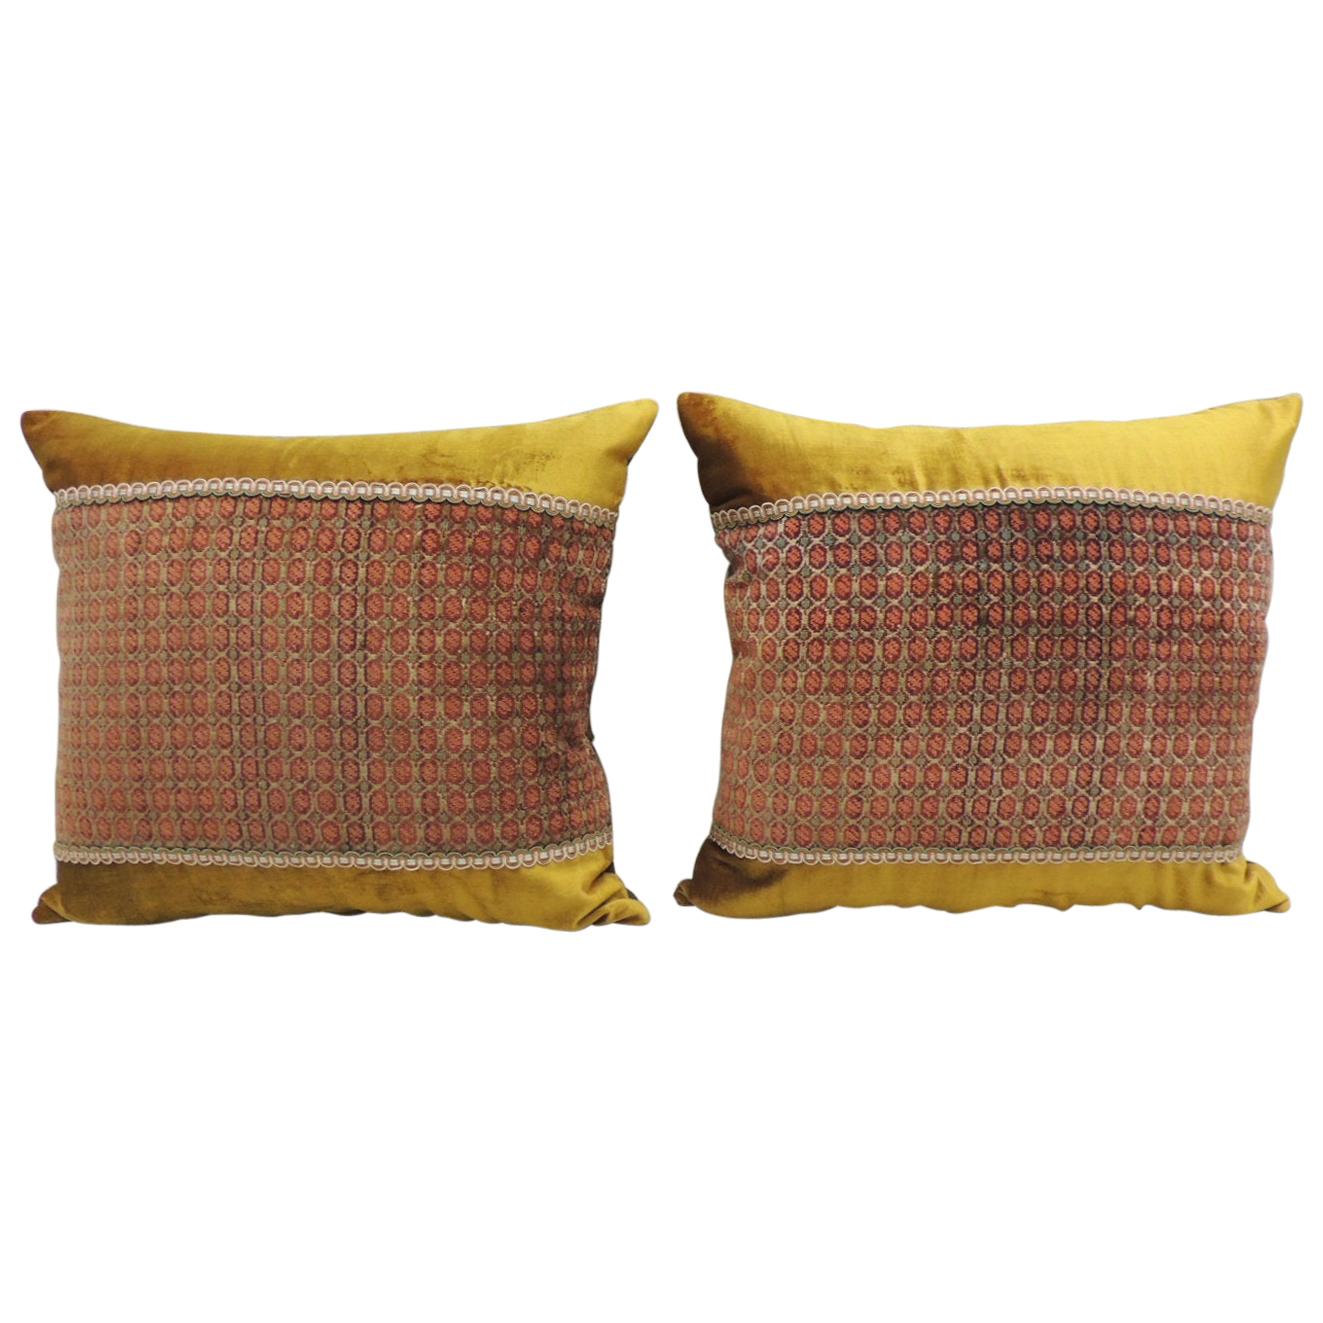 Pair of Red and Gold Silk Velvet Square Decorative Pillows